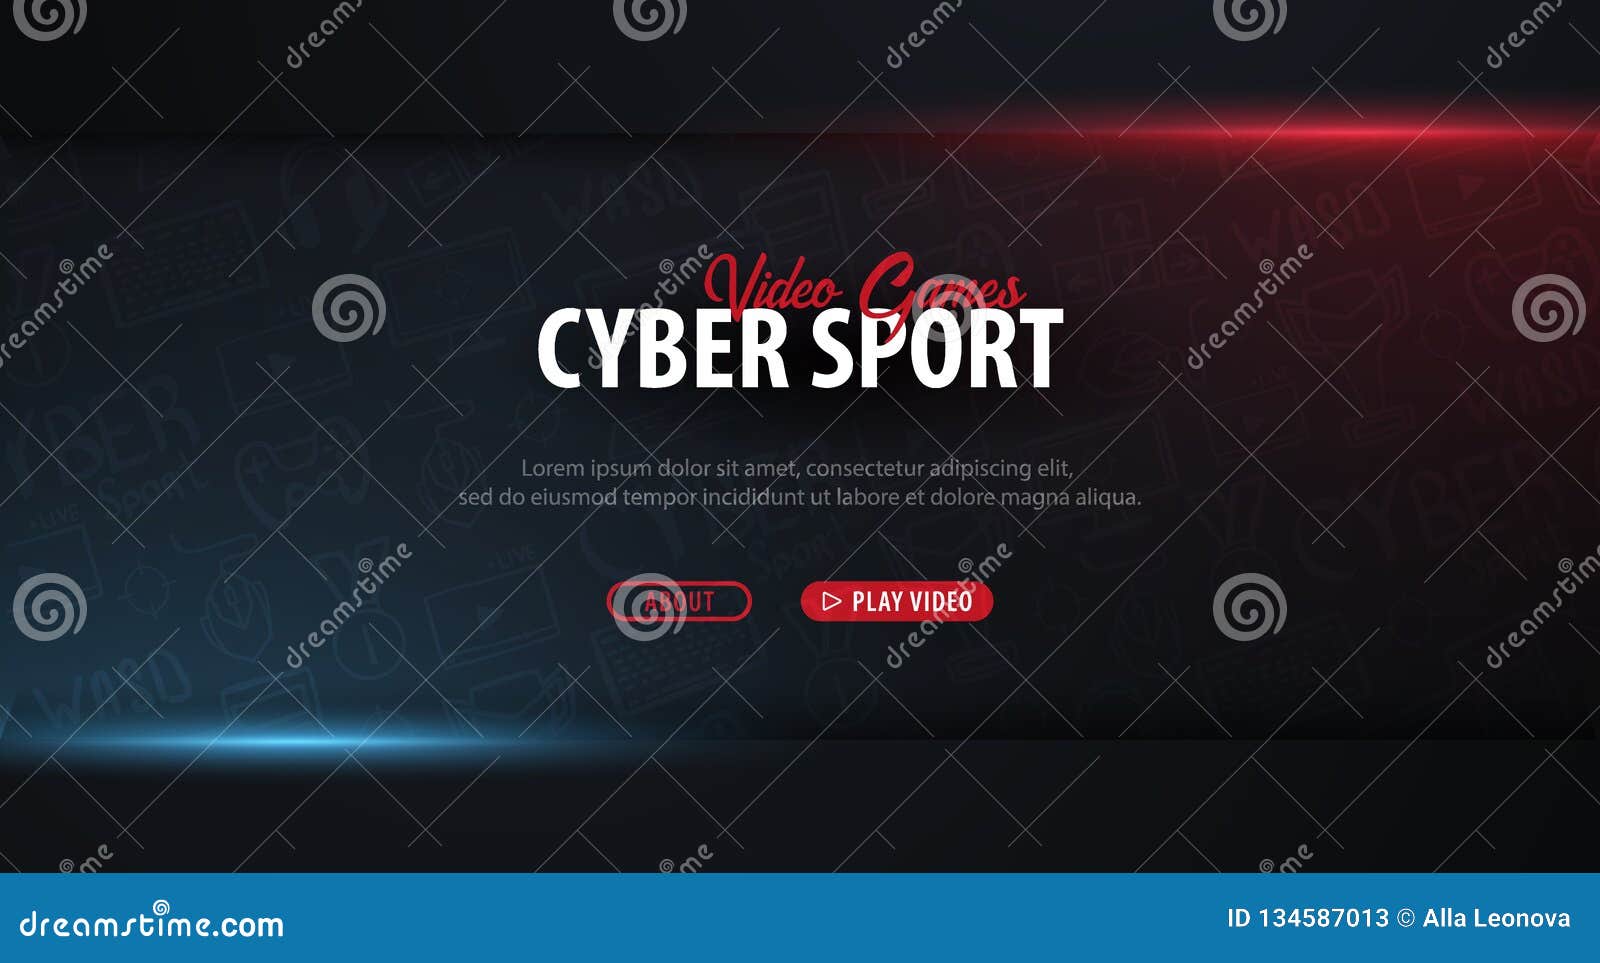 Cyber Sport Banner. Esports Gaming. Video Games. Live Streaming Game Match